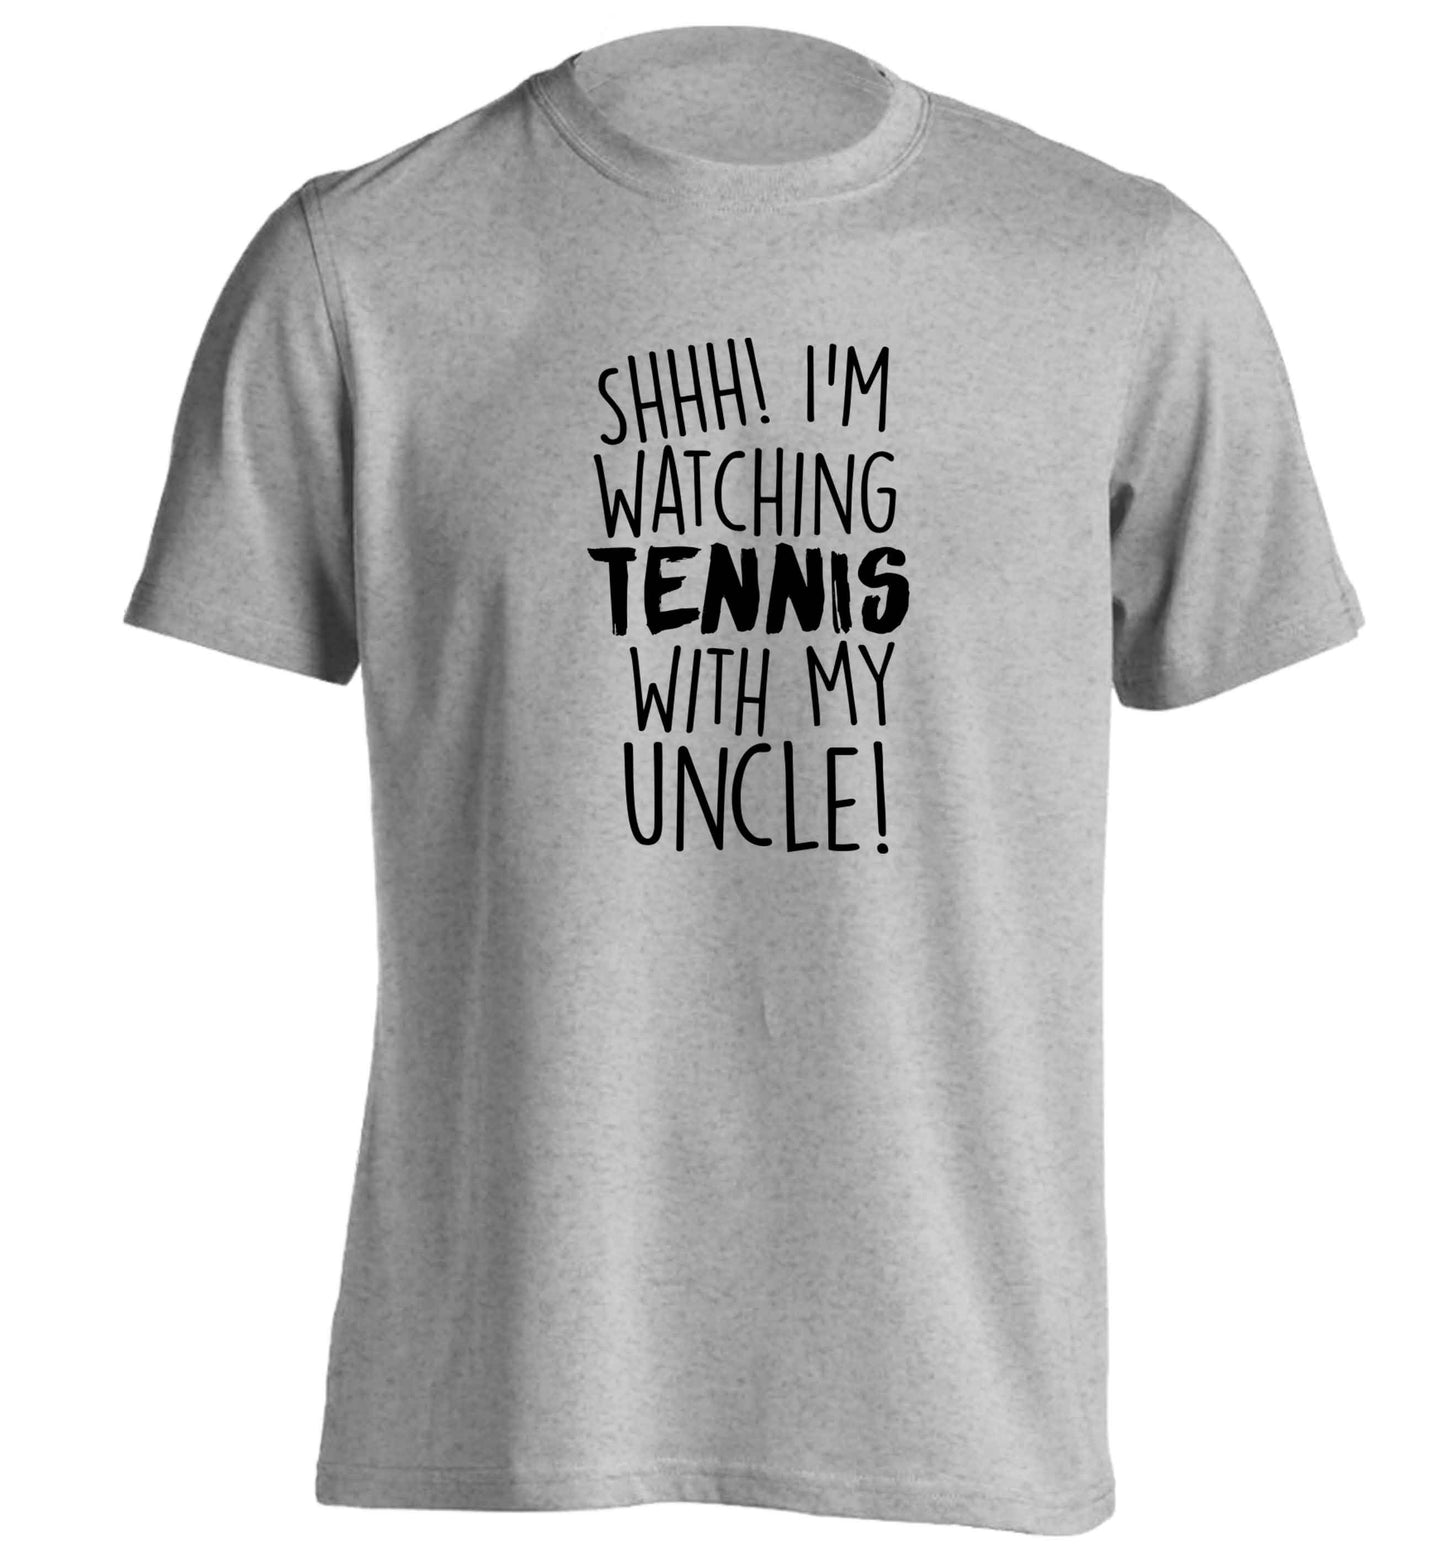 Shh! I'm watching tennis with my uncle! adults unisex grey Tshirt 2XL